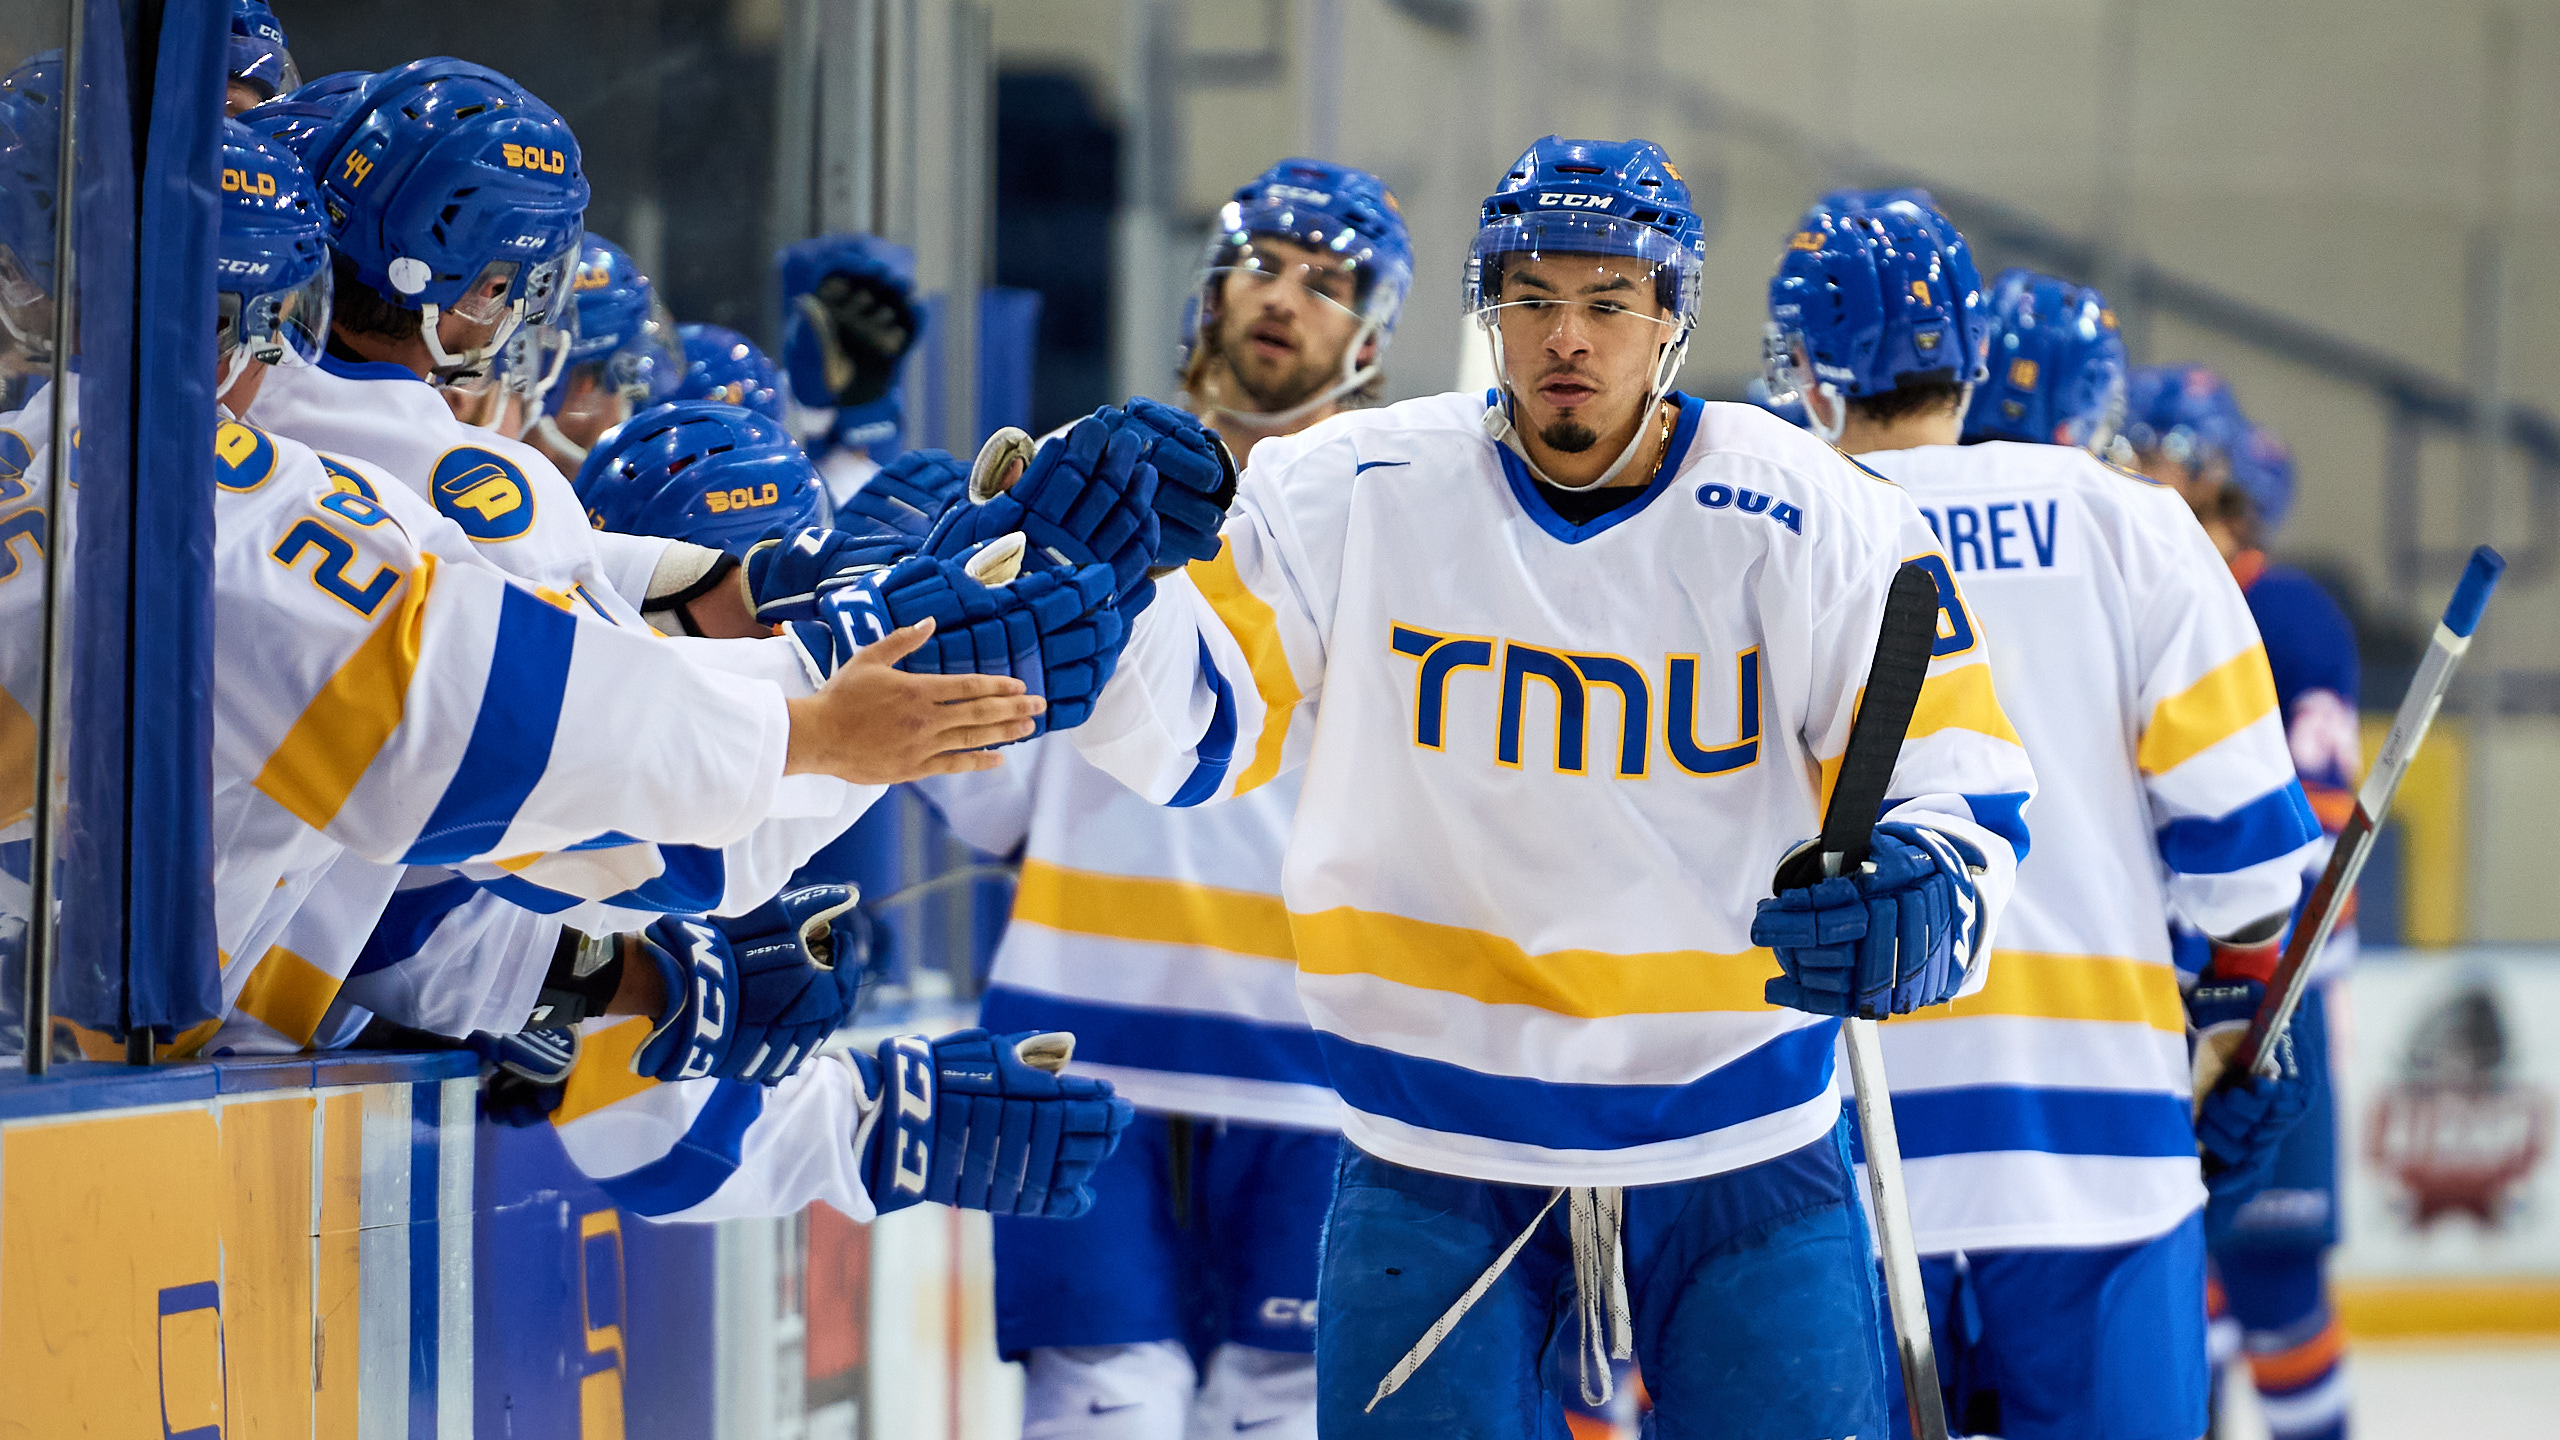 TMU men's hockey player Kyle Bollers fist bumps his teammates after he scores a goal